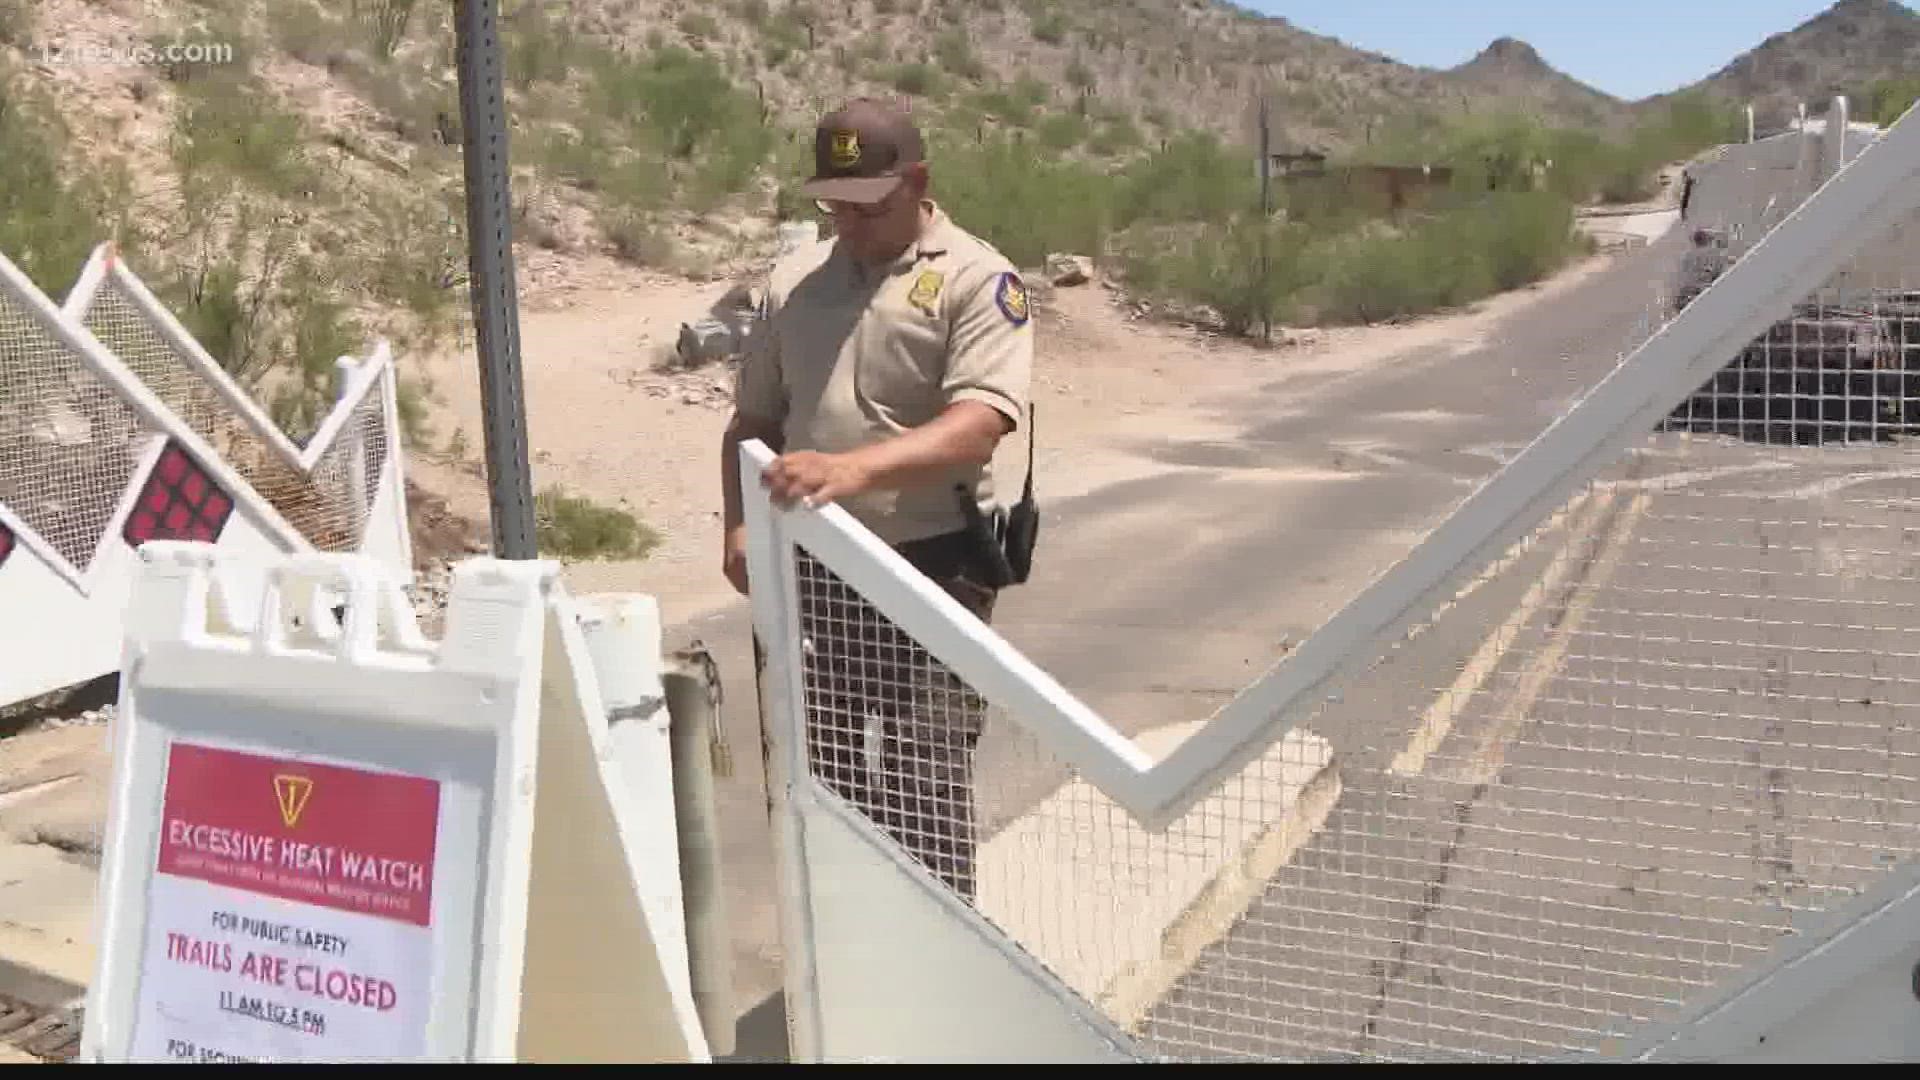 The city of Phoenix has decided to formally adopt a new policy that restricts access to local hiking trails during days of extreme heat.